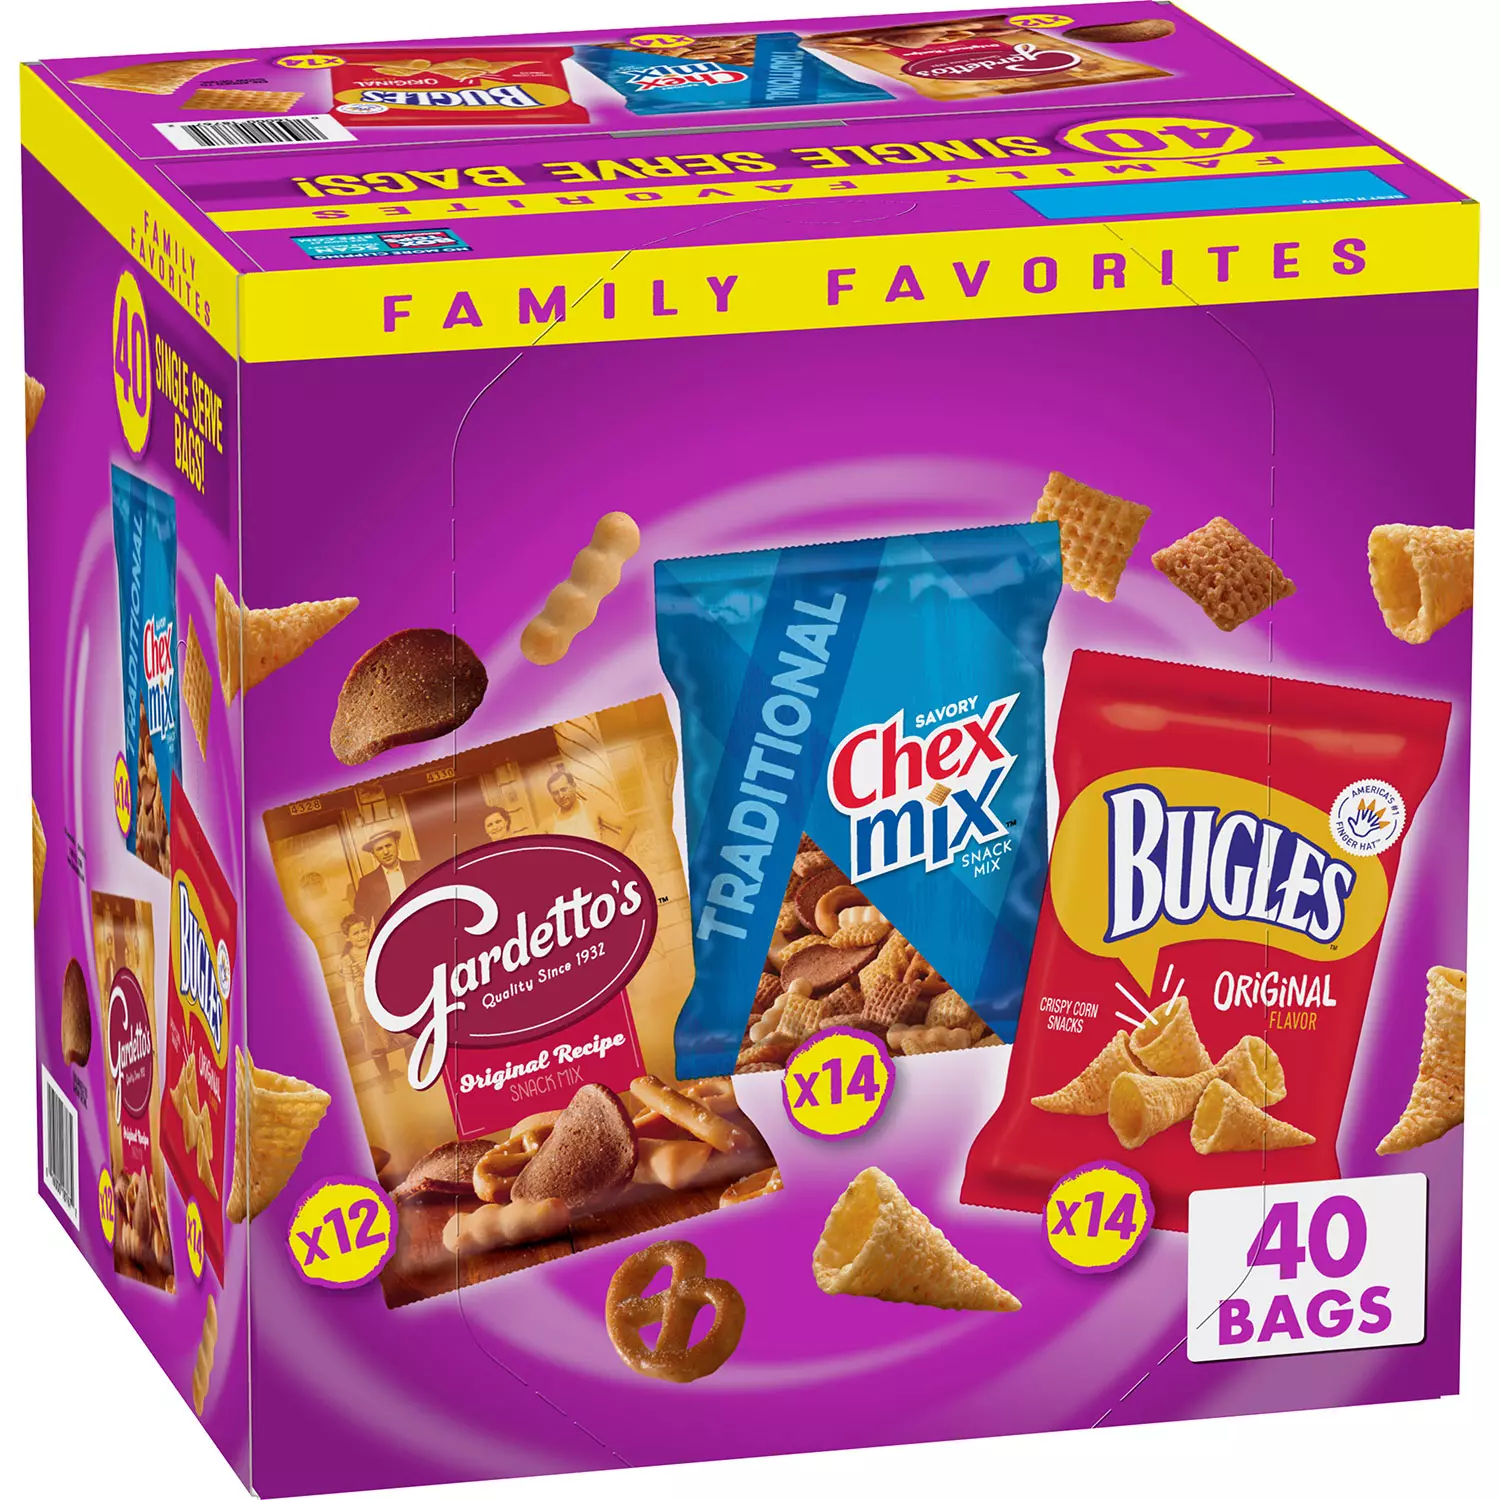 Bugles ChexMix and Gardetto Variety Pack